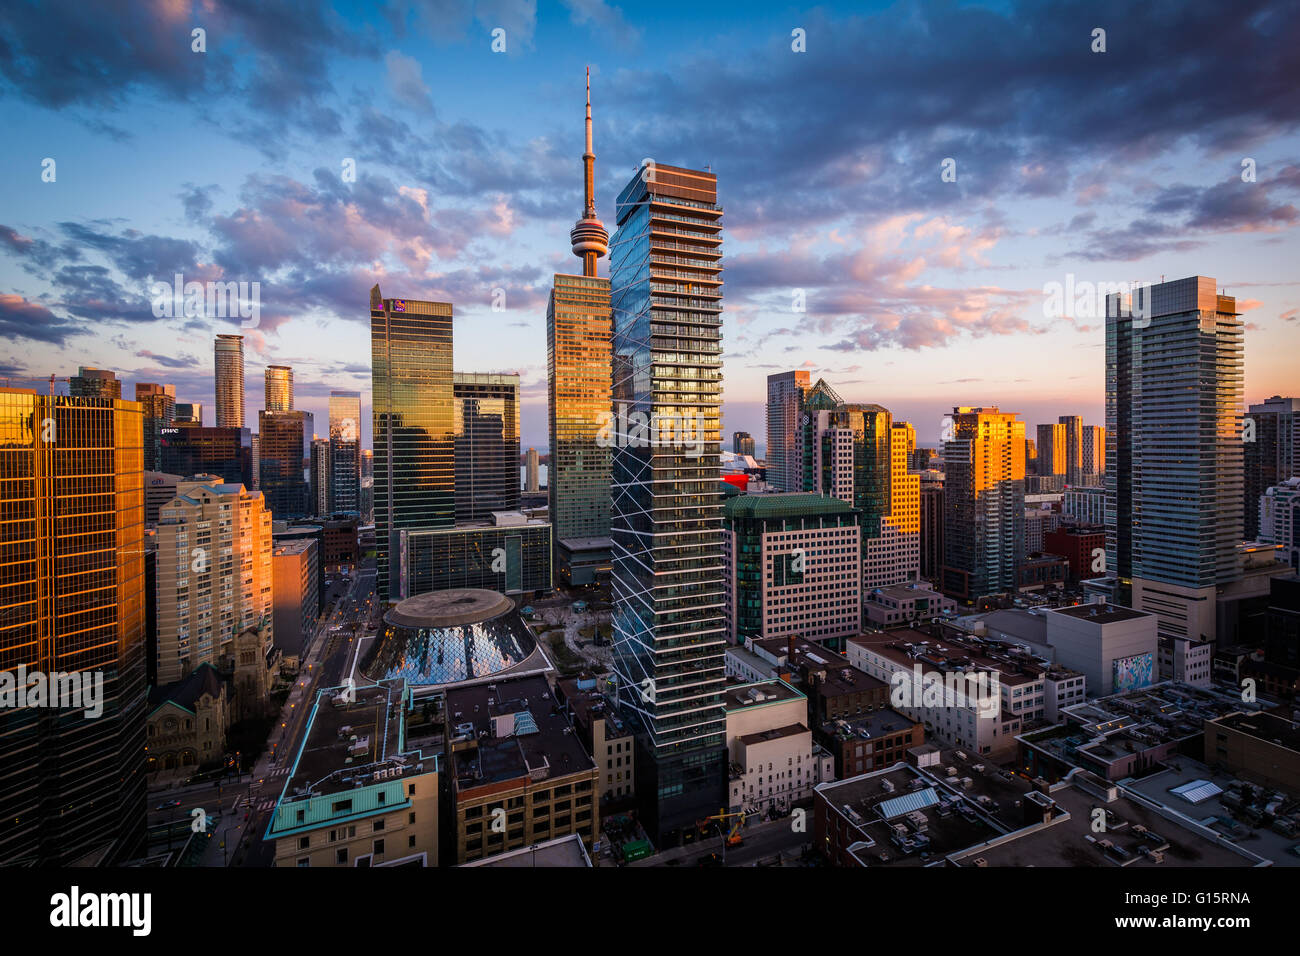 View of modern buildings at sunset in downtown Toronto, Ontario. Stock Photo